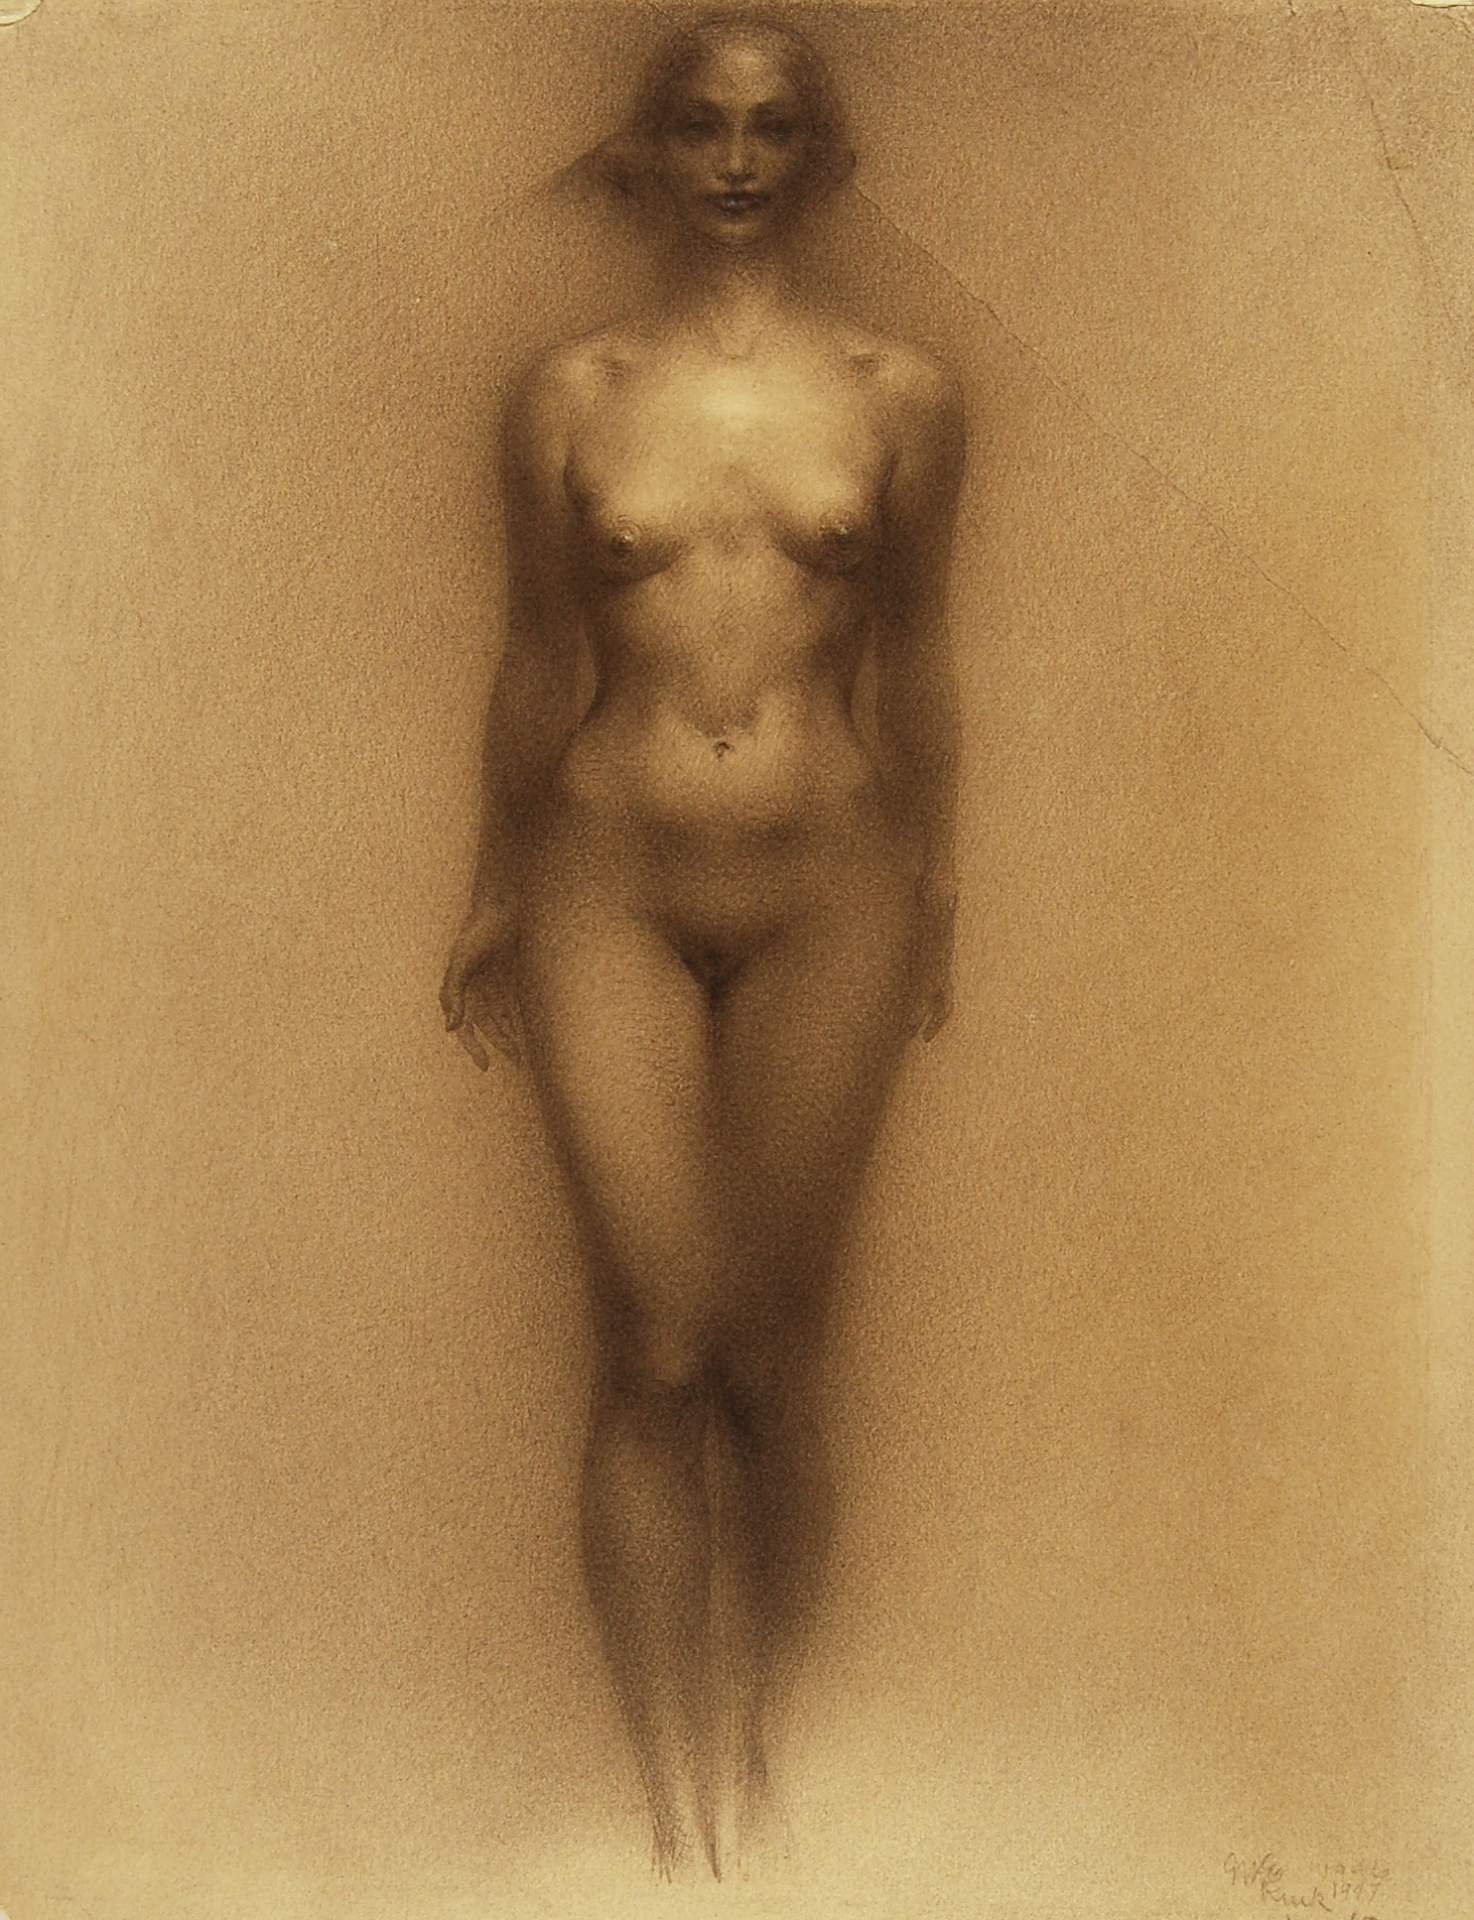 Untitled (Standing Female Nude)